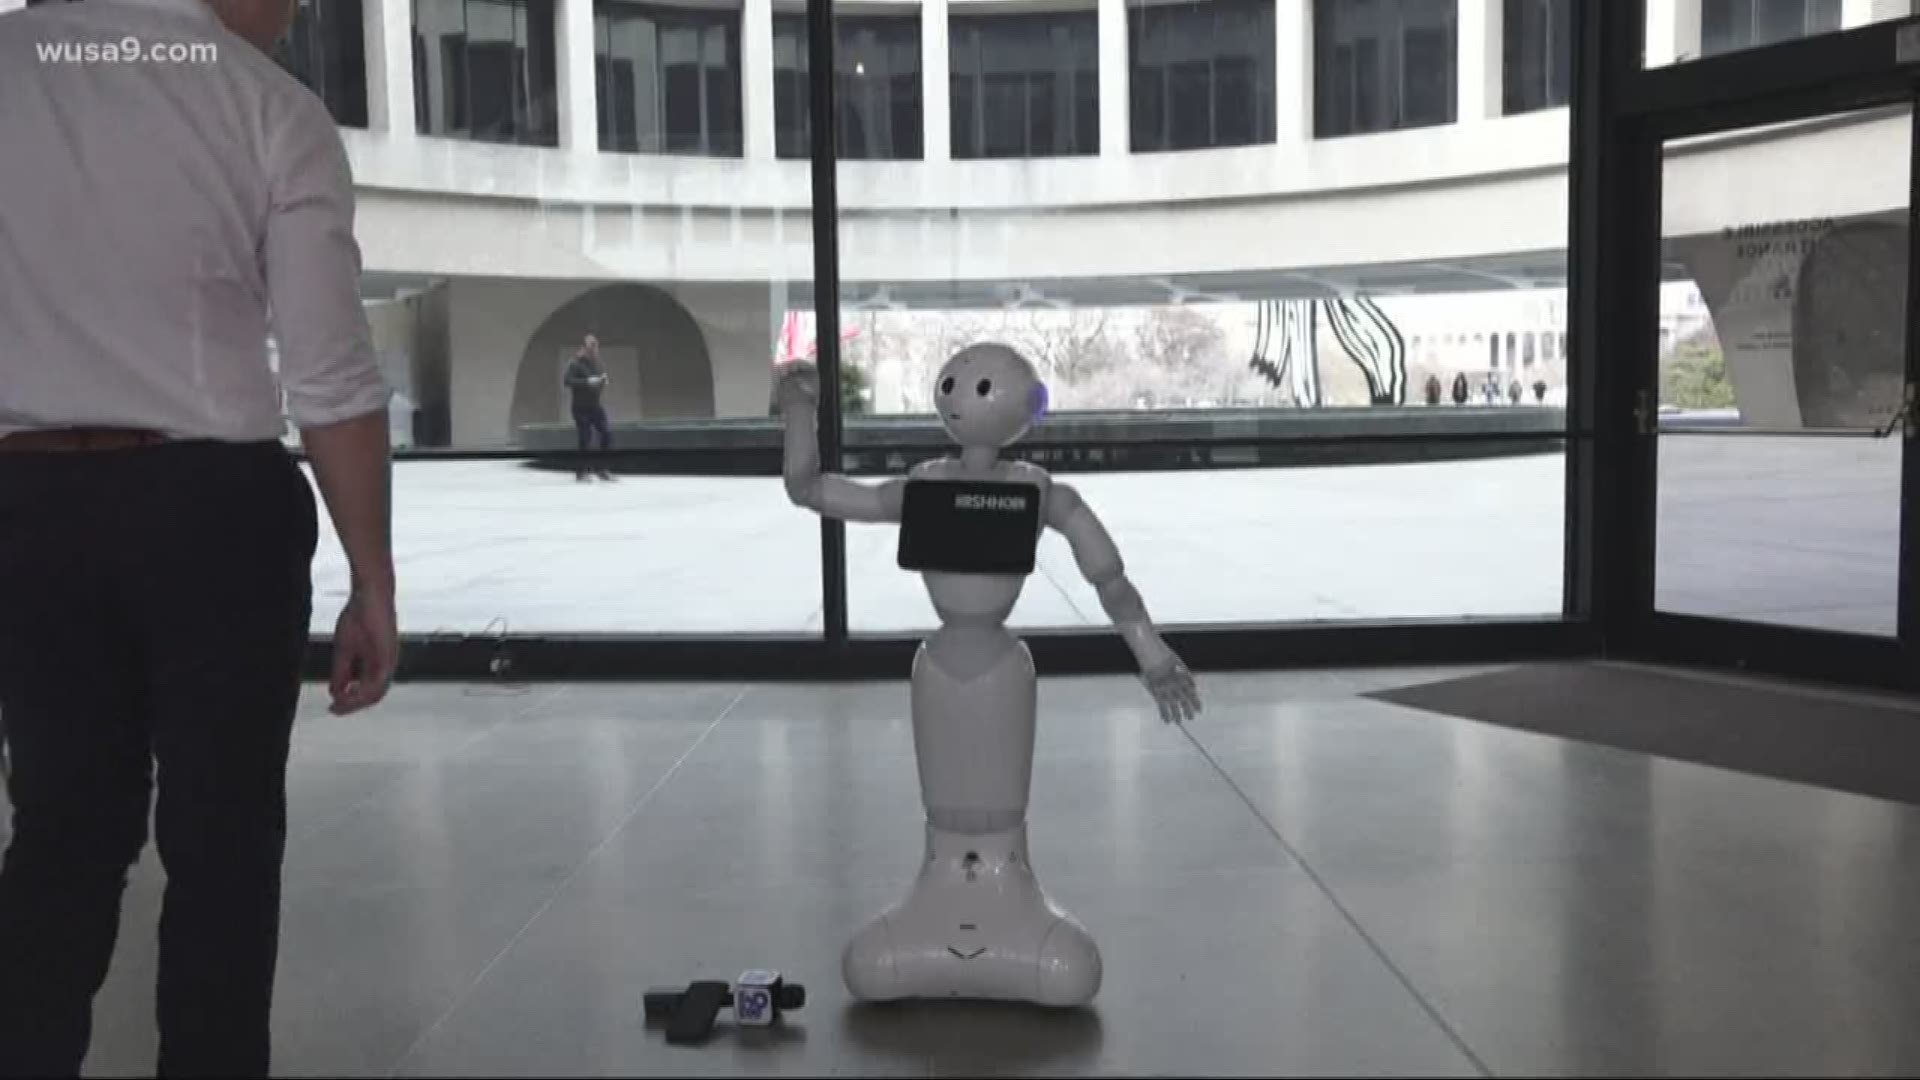 A new robot is at the Smithsonian to help make your experience less intimidating.